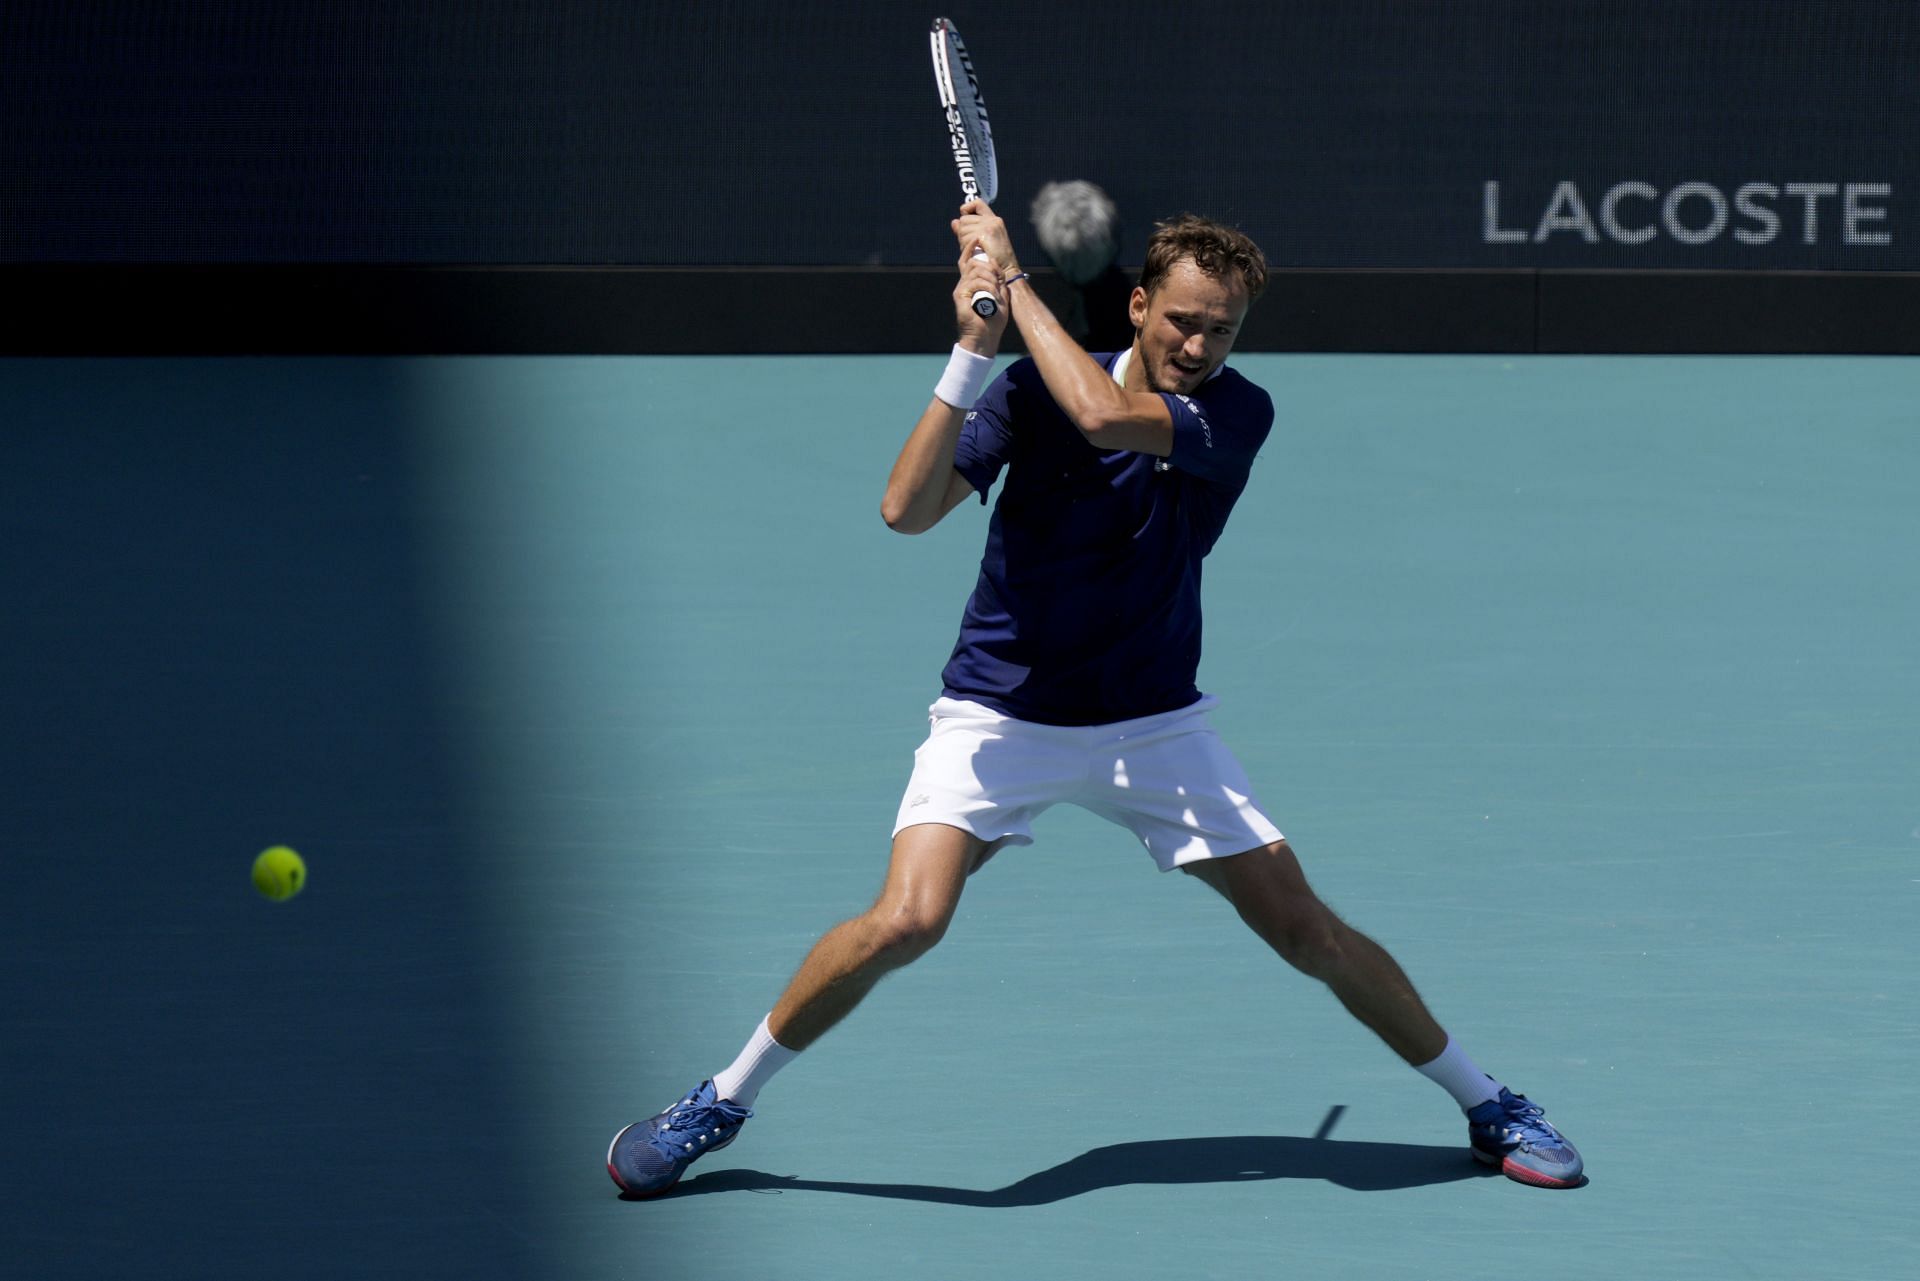 Daniil Medvedev will be the favorite heading into his match against Martinez